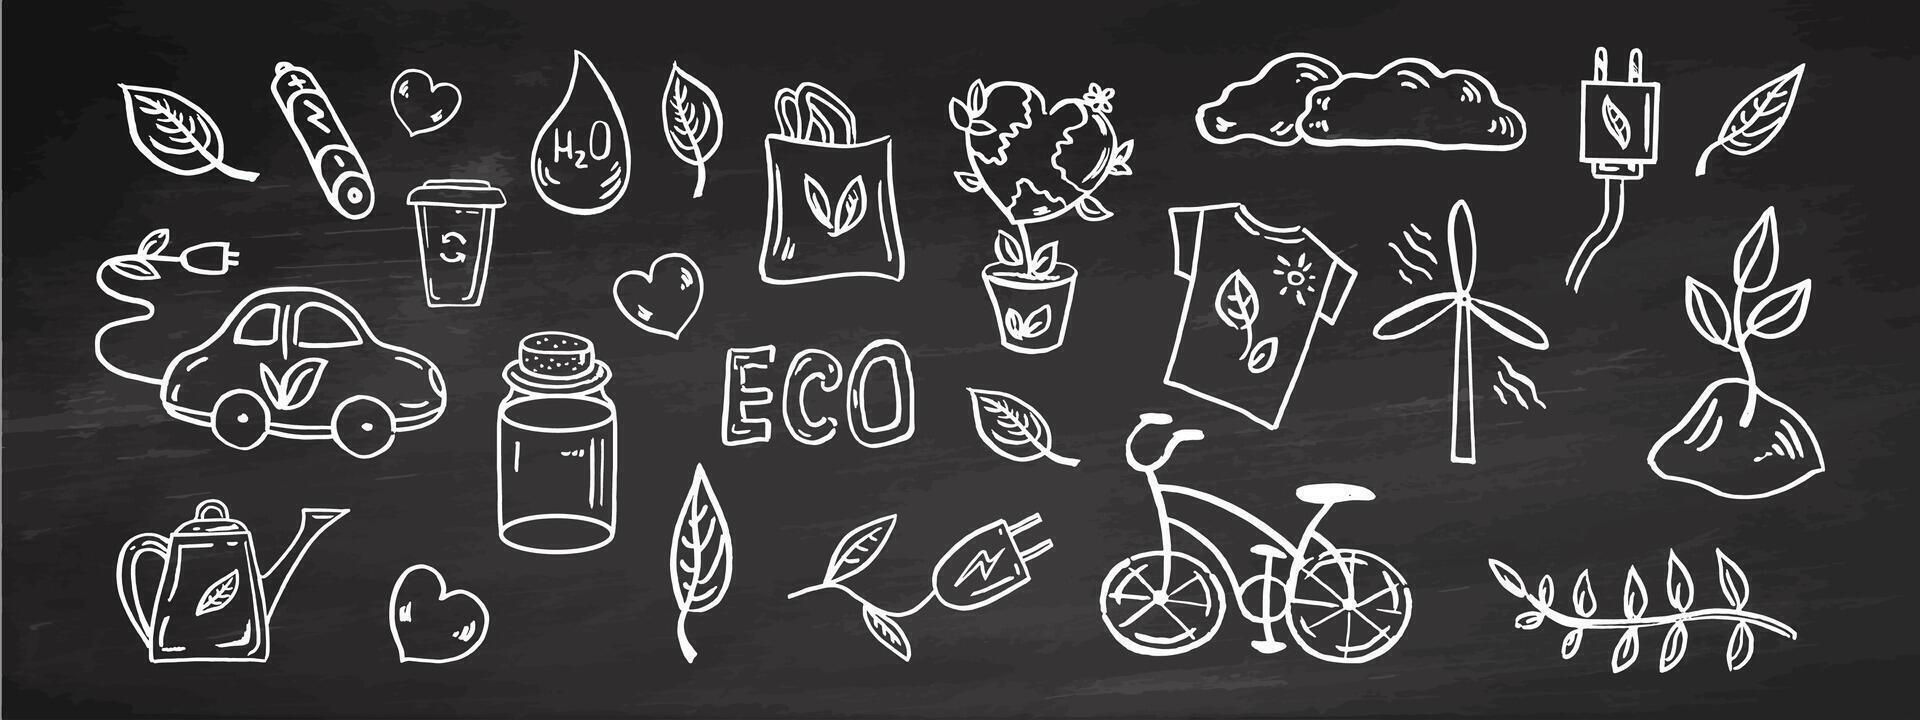 Set of ecology. Hand-drawn doodle vector illustration on chalkboard background. Ecology problem, recycling and green energy icons. Environmental symbols.